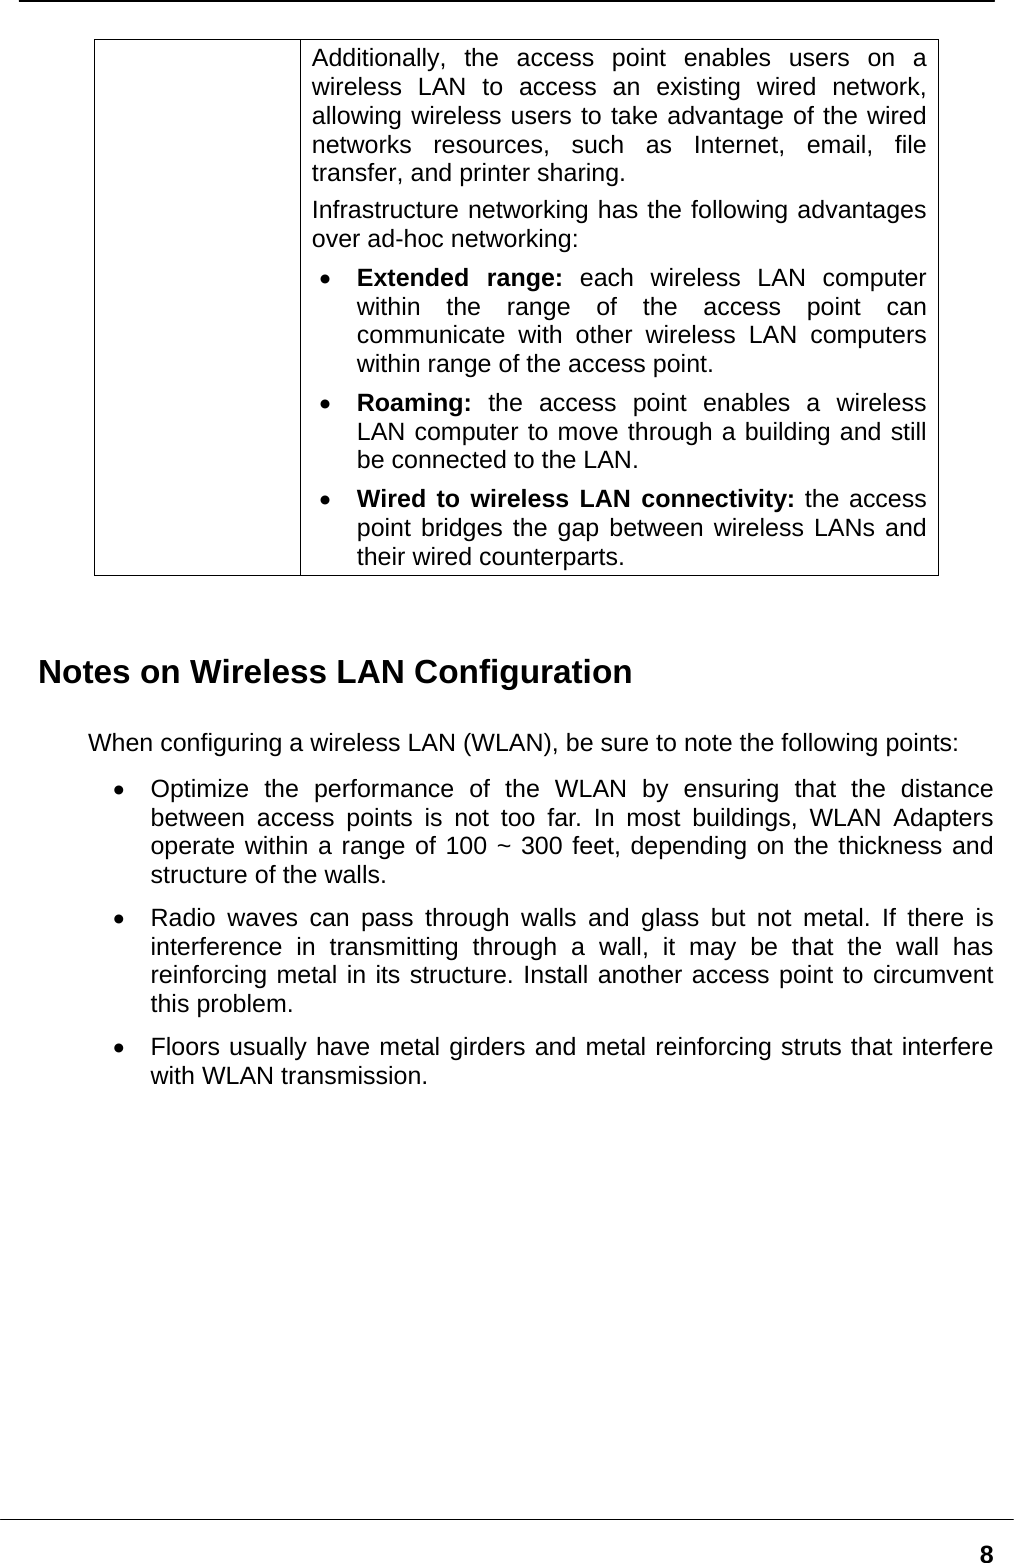   8Additionally, the access point enables users on a wireless LAN to access an existing wired network, allowing wireless users to take advantage of the wired networks resources, such as Internet, email, file transfer, and printer sharing.   Infrastructure networking has the following advantages over ad-hoc networking: •  Extended range: each wireless LAN computer within the range of the access point can communicate with other wireless LAN computers within range of the access point. •  Roaming: the access point enables a wireless LAN computer to move through a building and still be connected to the LAN. •  Wired to wireless LAN connectivity: the access point bridges the gap between wireless LANs and their wired counterparts.   Notes on Wireless LAN Configuration  When configuring a wireless LAN (WLAN), be sure to note the following points: •  Optimize the performance of the WLAN by ensuring that the distance between access points is not too far. In most buildings, WLAN Adapters operate within a range of 100 ~ 300 feet, depending on the thickness and structure of the walls.   •  Radio waves can pass through walls and glass but not metal. If there is interference in transmitting through a wall, it may be that the wall has reinforcing metal in its structure. Install another access point to circumvent this problem. •  Floors usually have metal girders and metal reinforcing struts that interfere with WLAN transmission.     